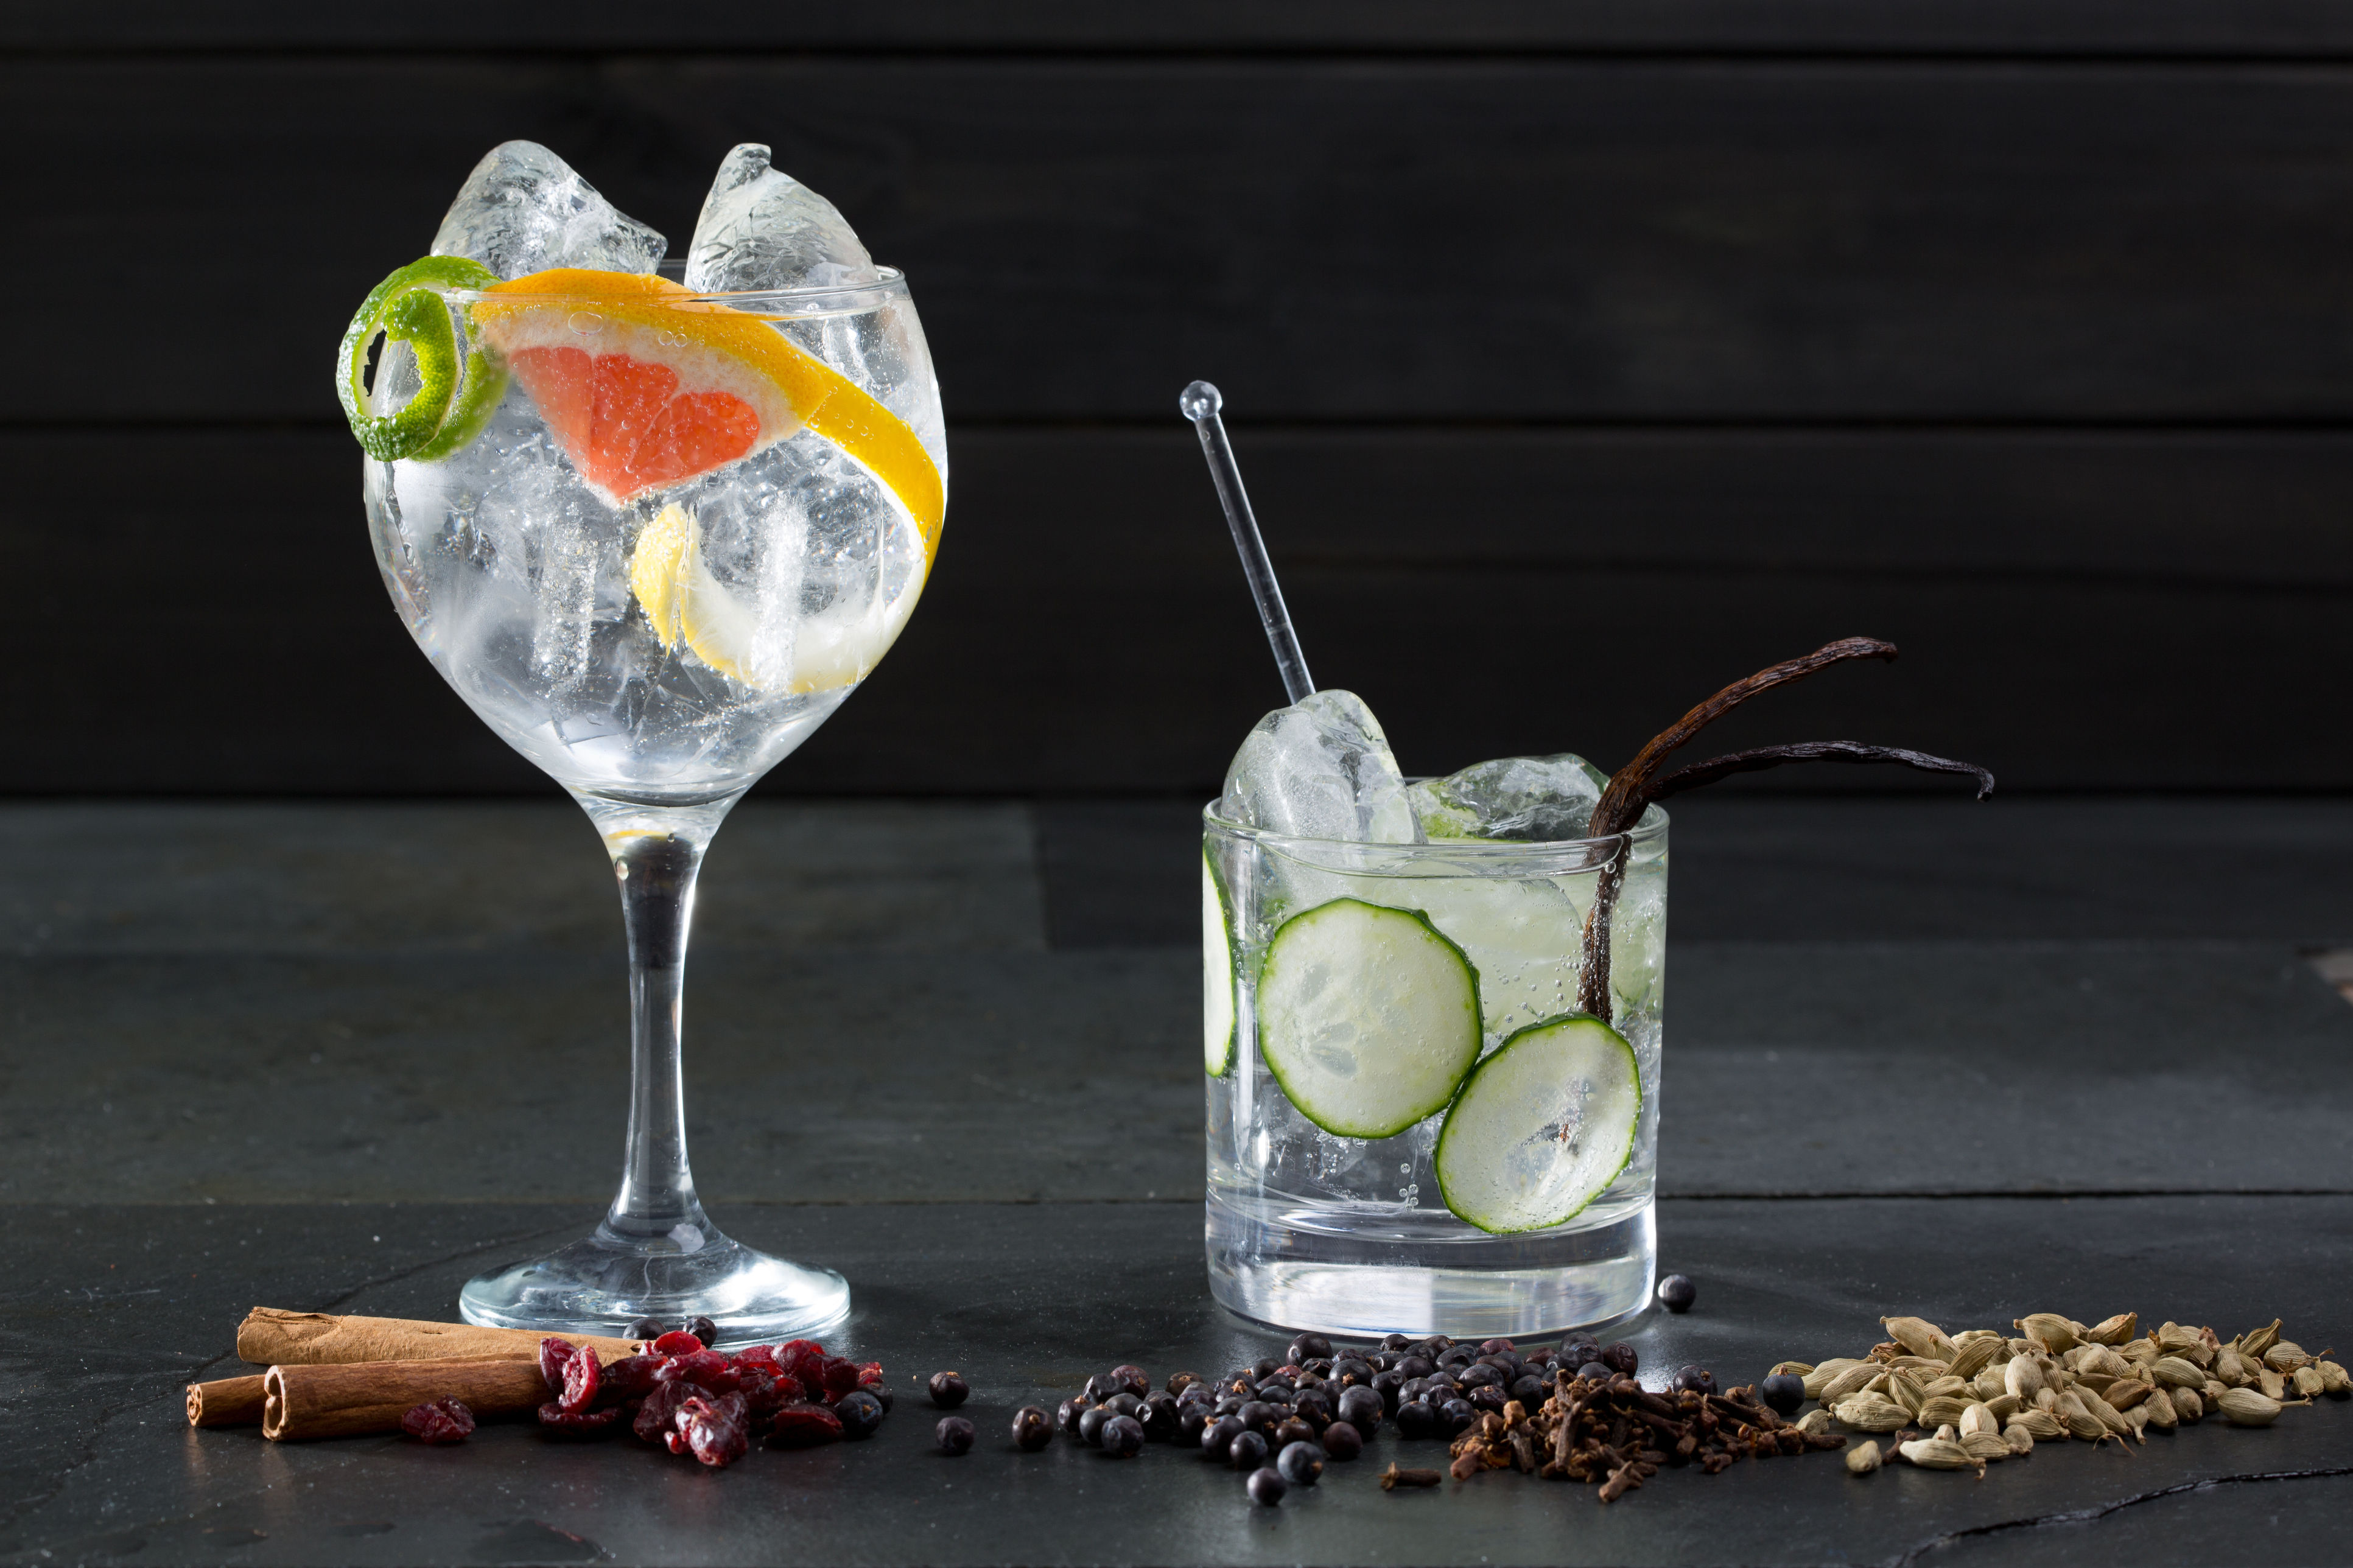 Education is important, so sign up for the world’s first gin diploma